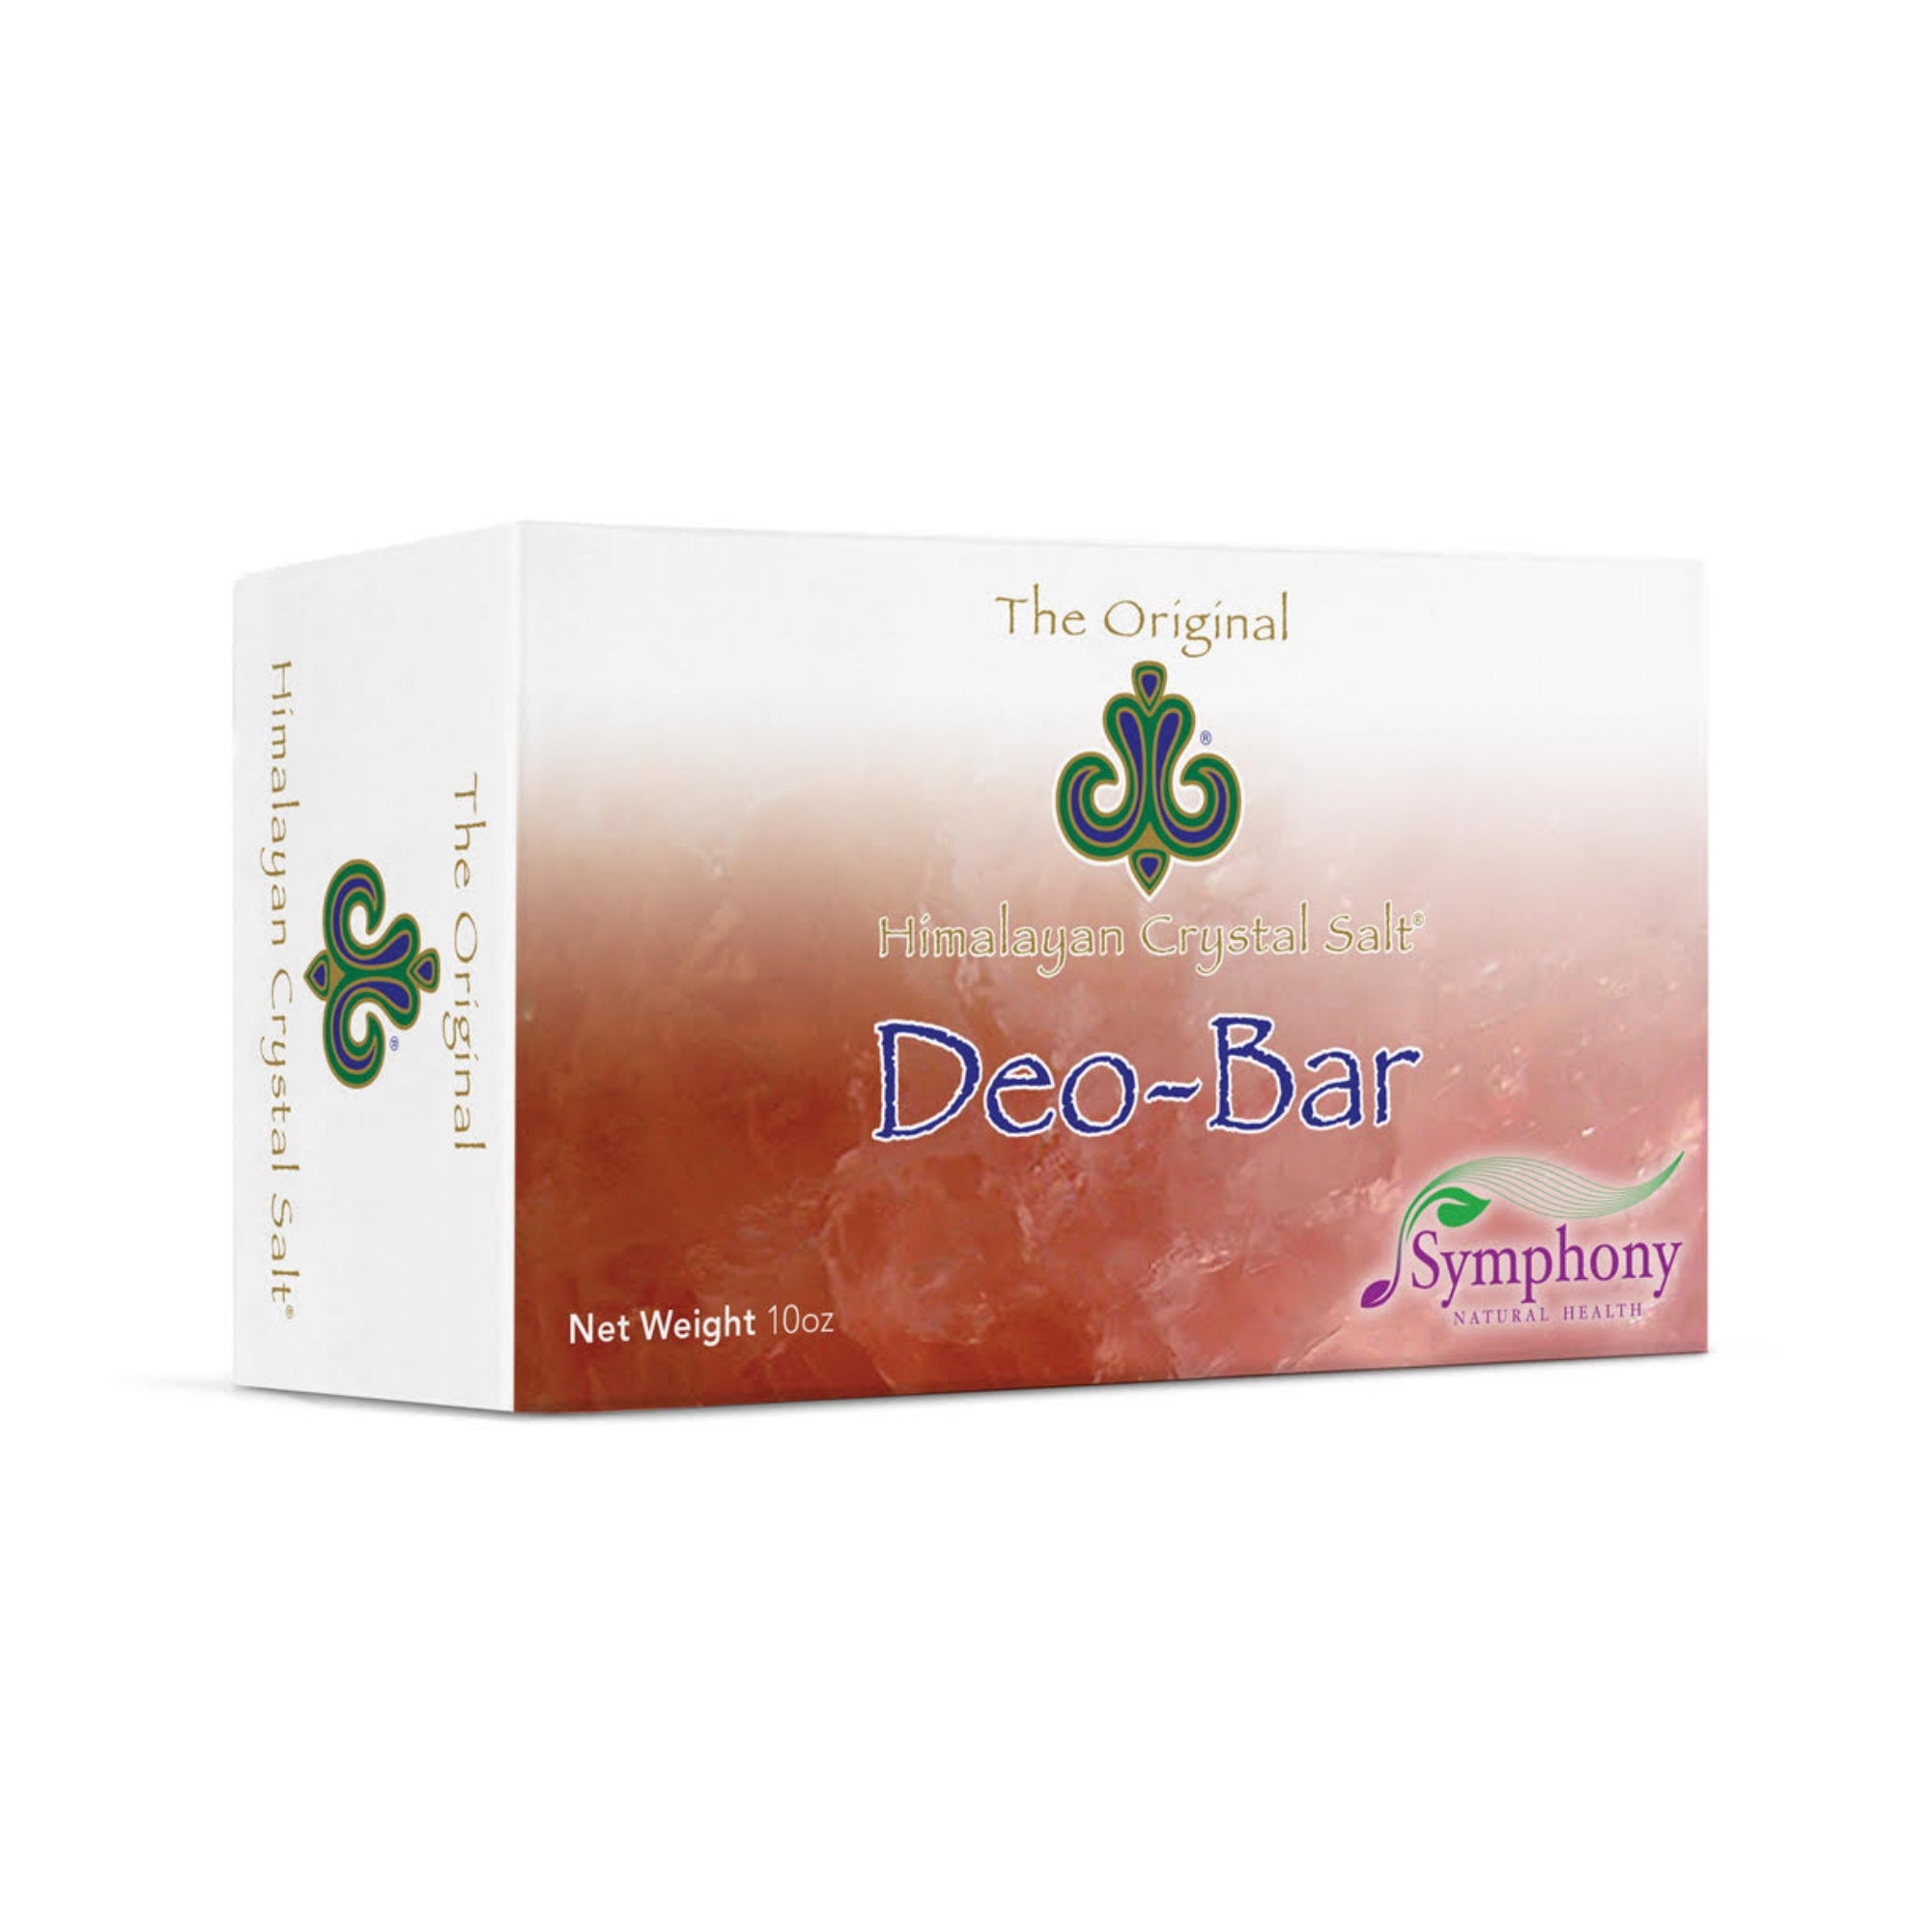 Deo-Bar right-facing product box with enlarged salt stones on front, and himalayan crystal salt logo